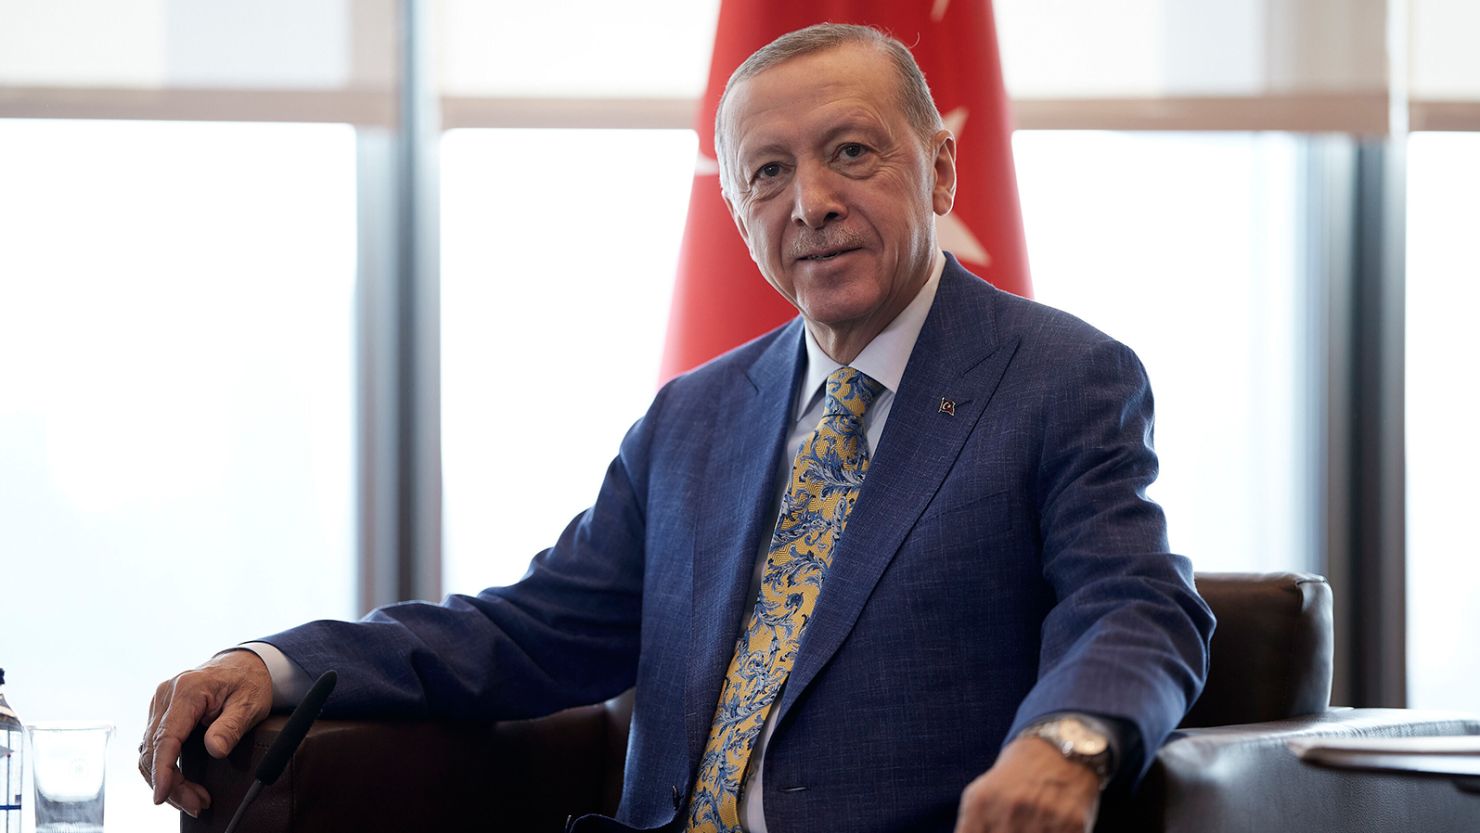 Turkish President Recep Tayyip Erdogan had stood in the path of Sweden joining NATO for more than a year over a multitude of concerns.